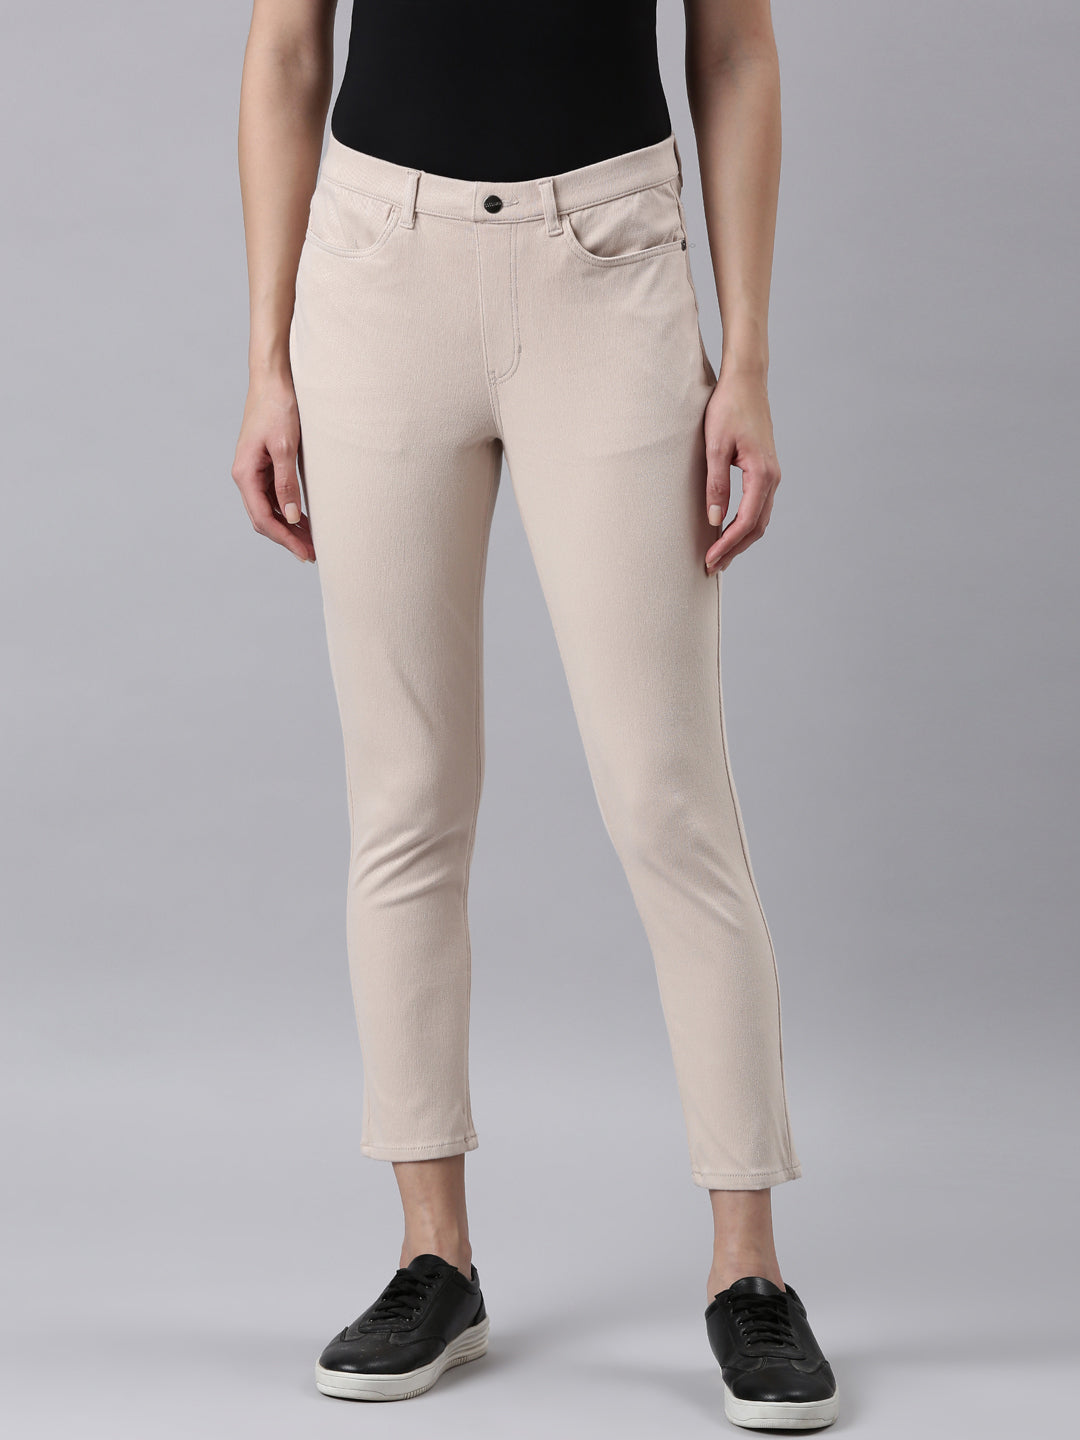 Women Solid Light Beige Mid Rise Cropped Jeggings